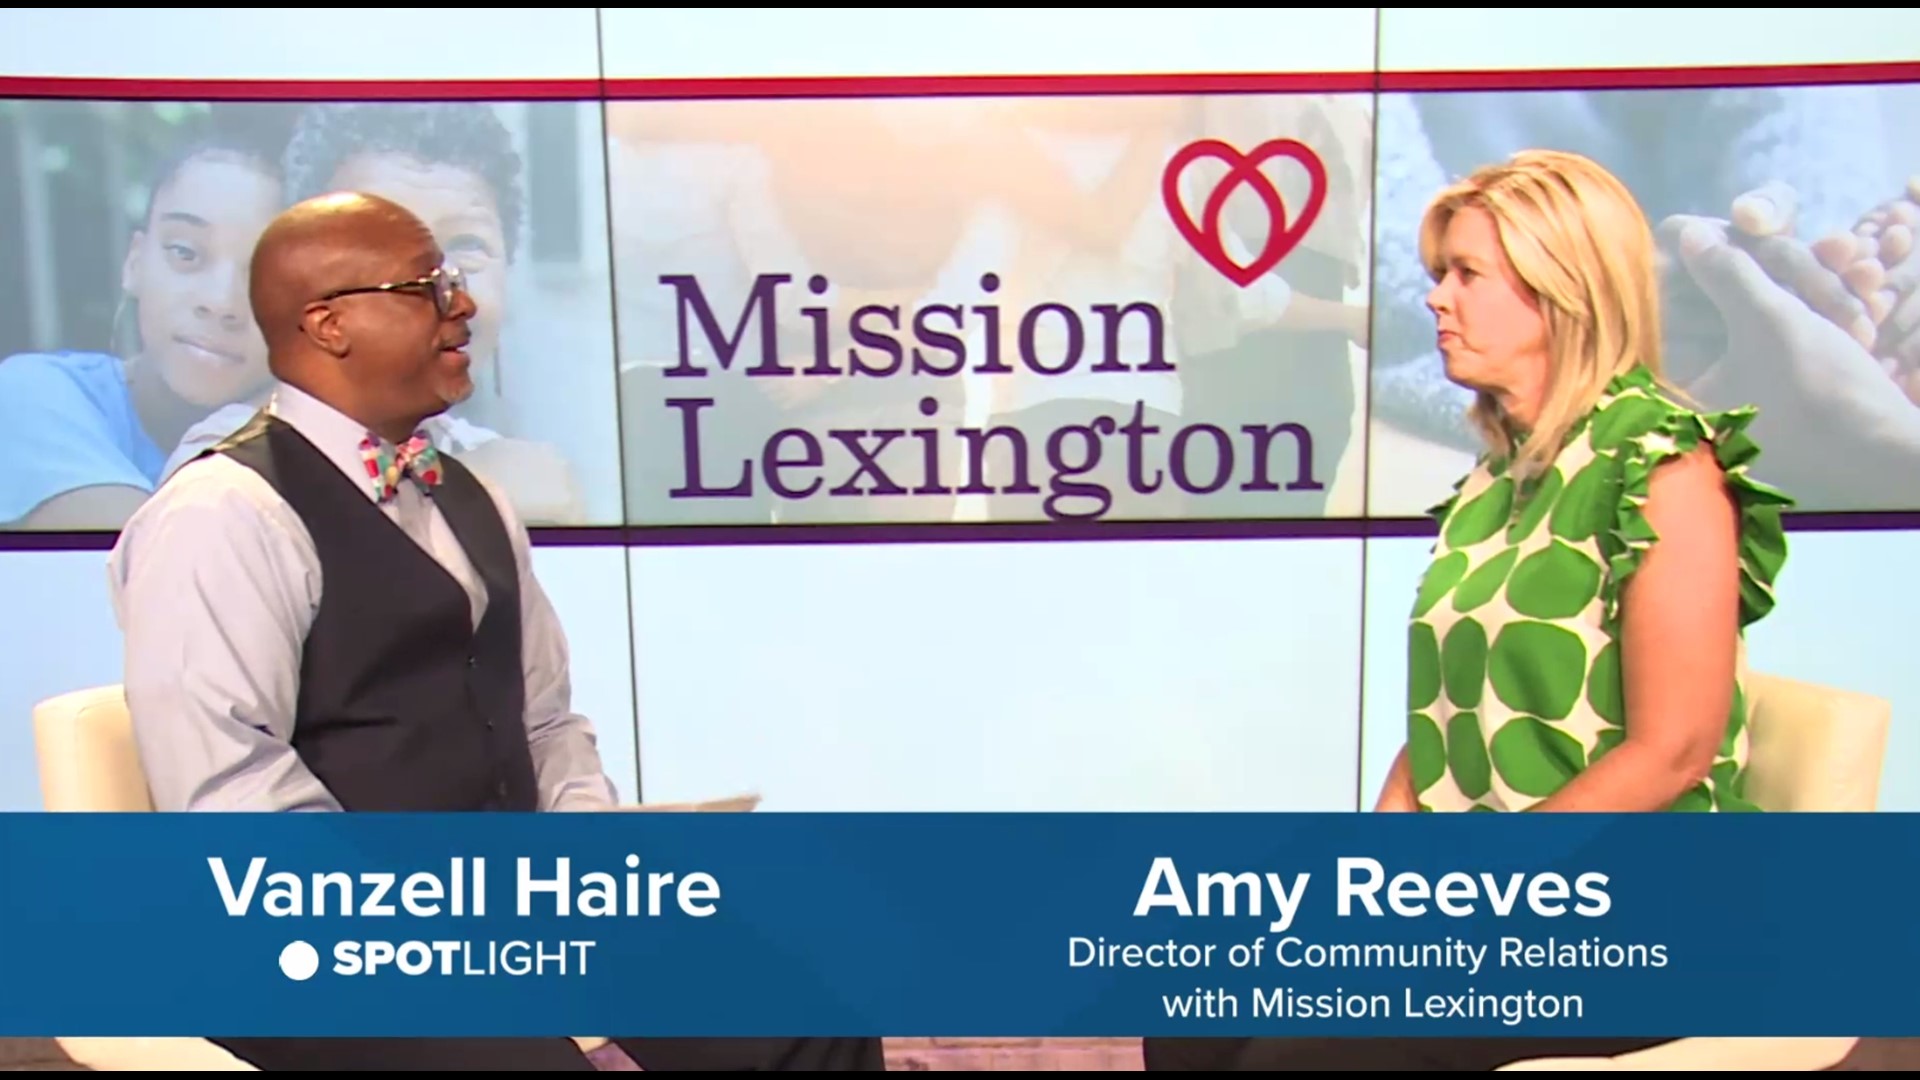 For 46 years, Mission Lexington has partnered with local churches to come together and serve those in crisis.